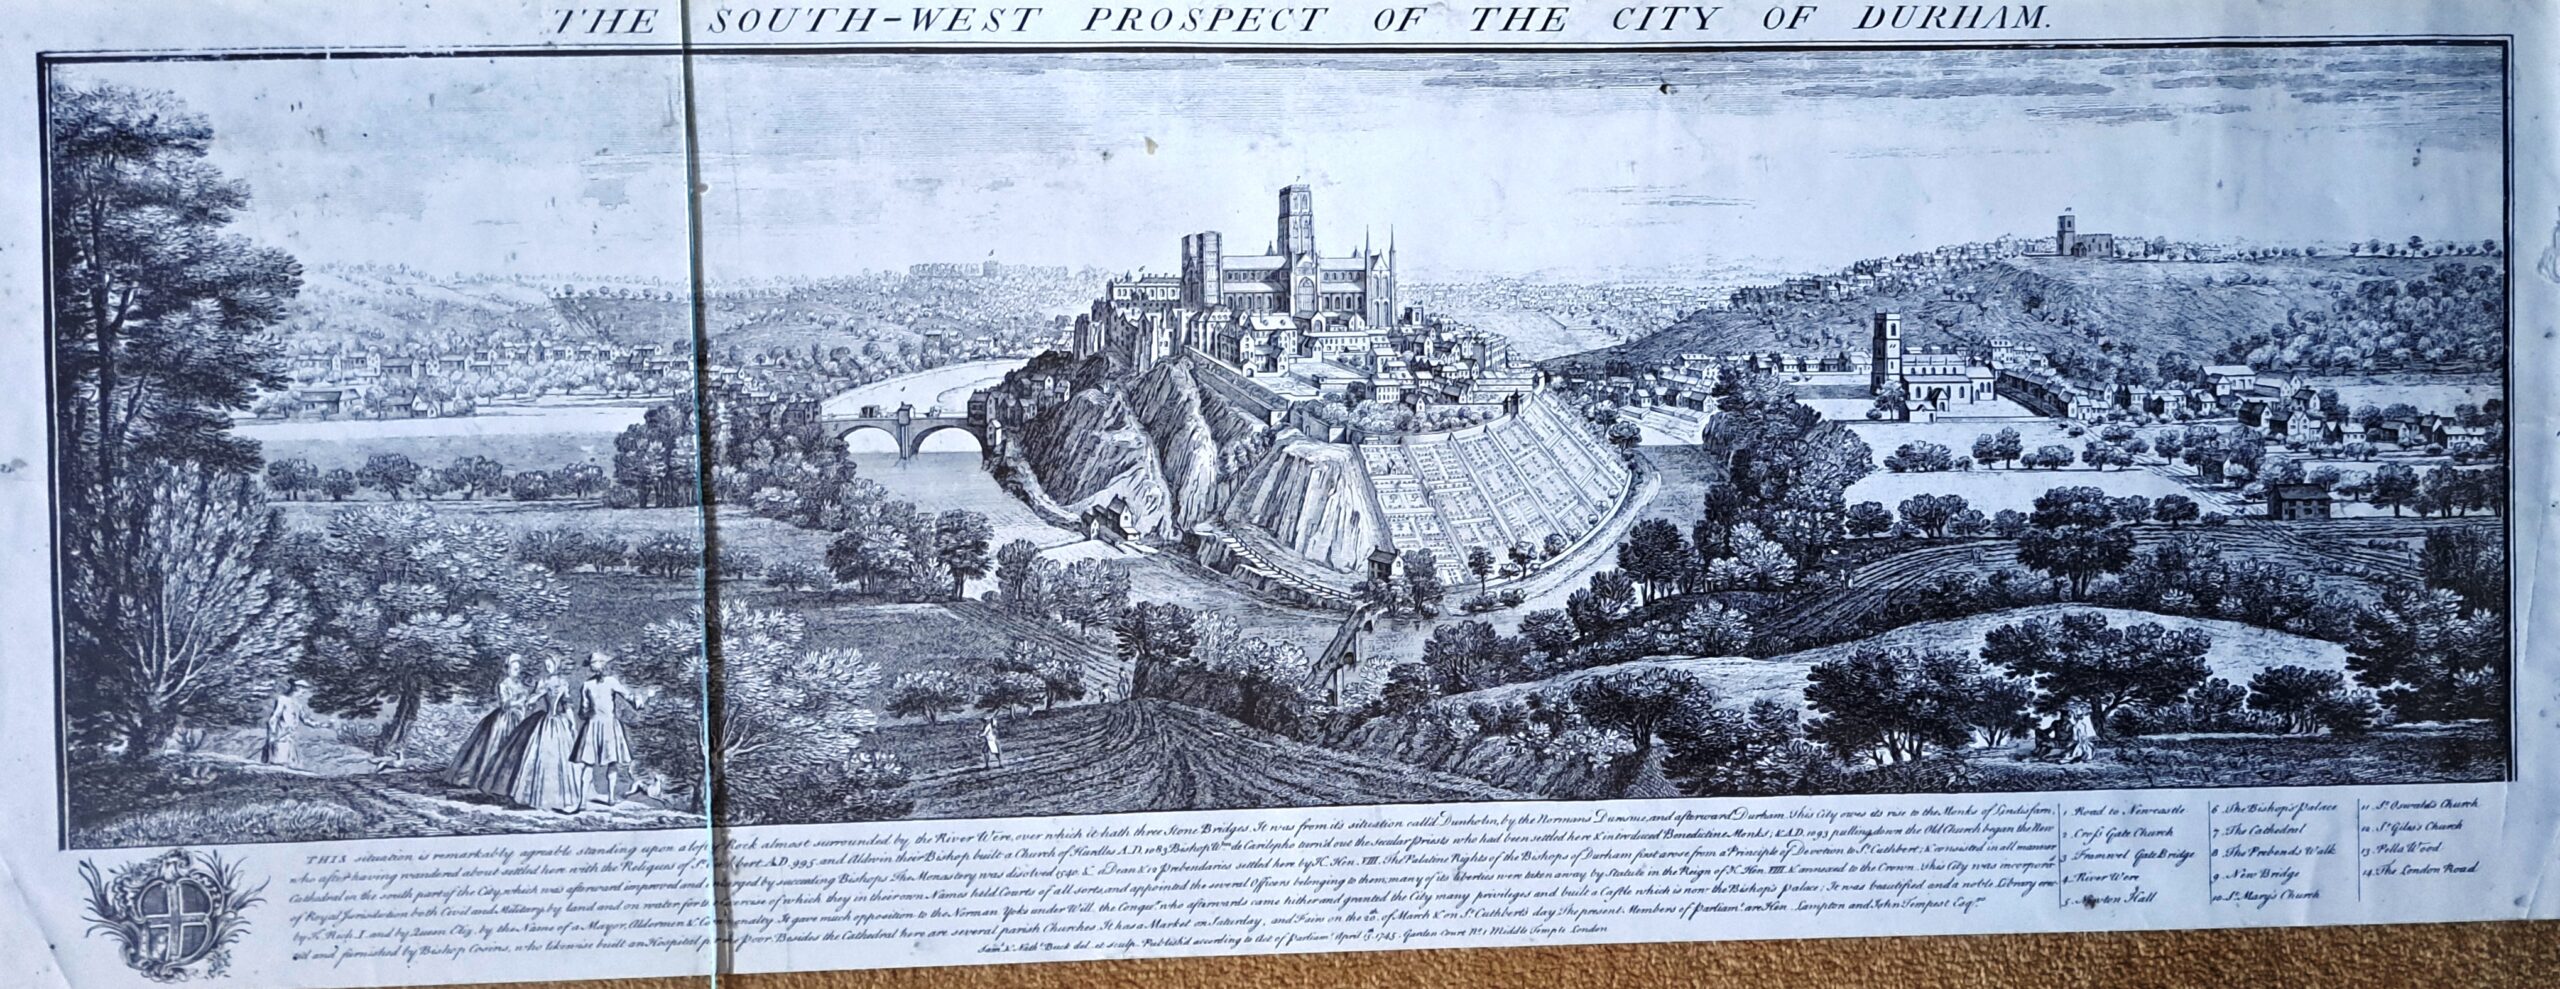 15 - South West Prospect of the City of Durham - 1745